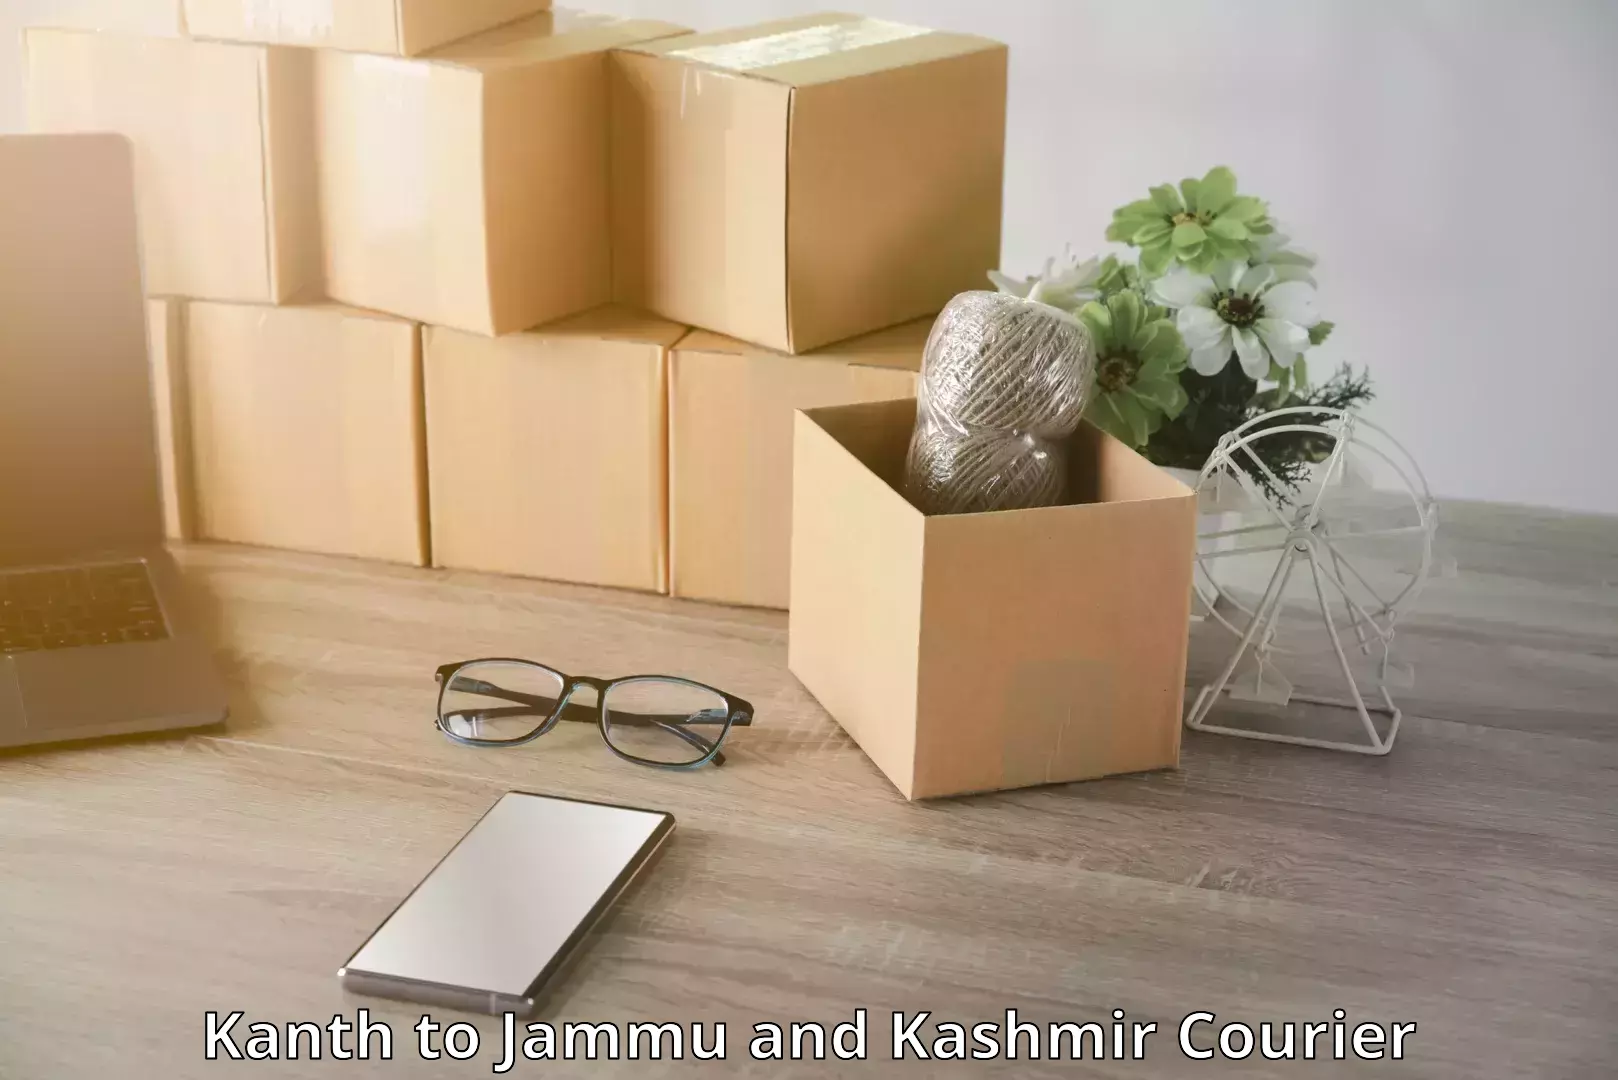 Express luggage delivery Kanth to Jammu and Kashmir